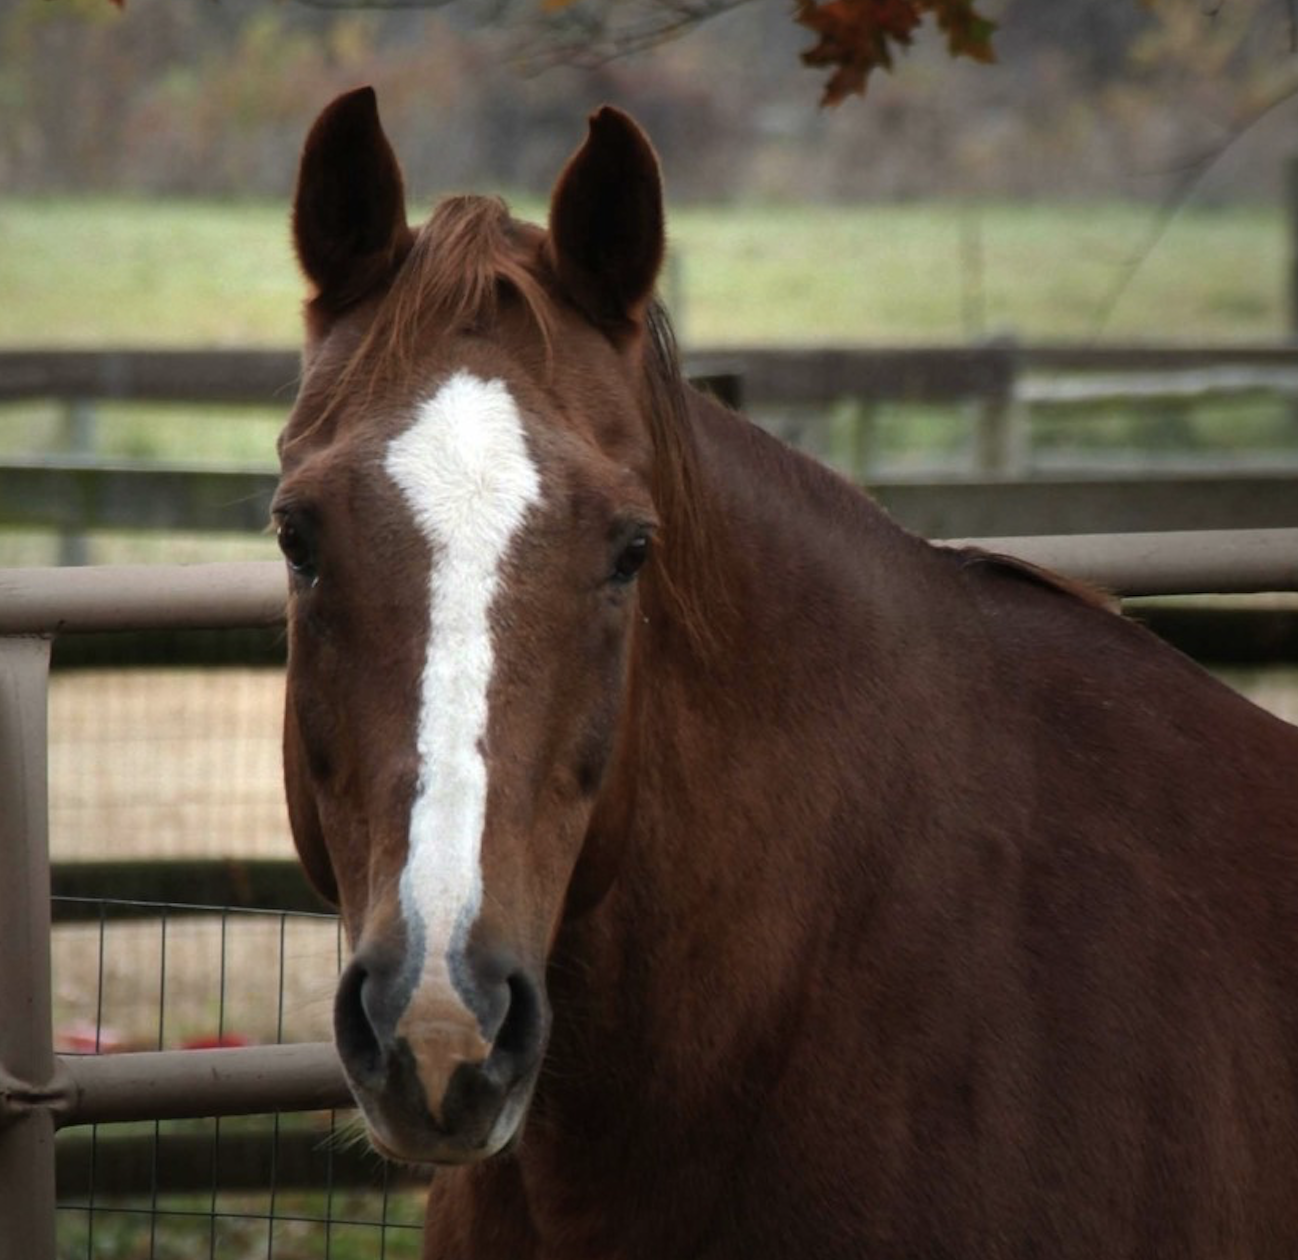 Brown horse with white stripe on its nose looks at the camera.